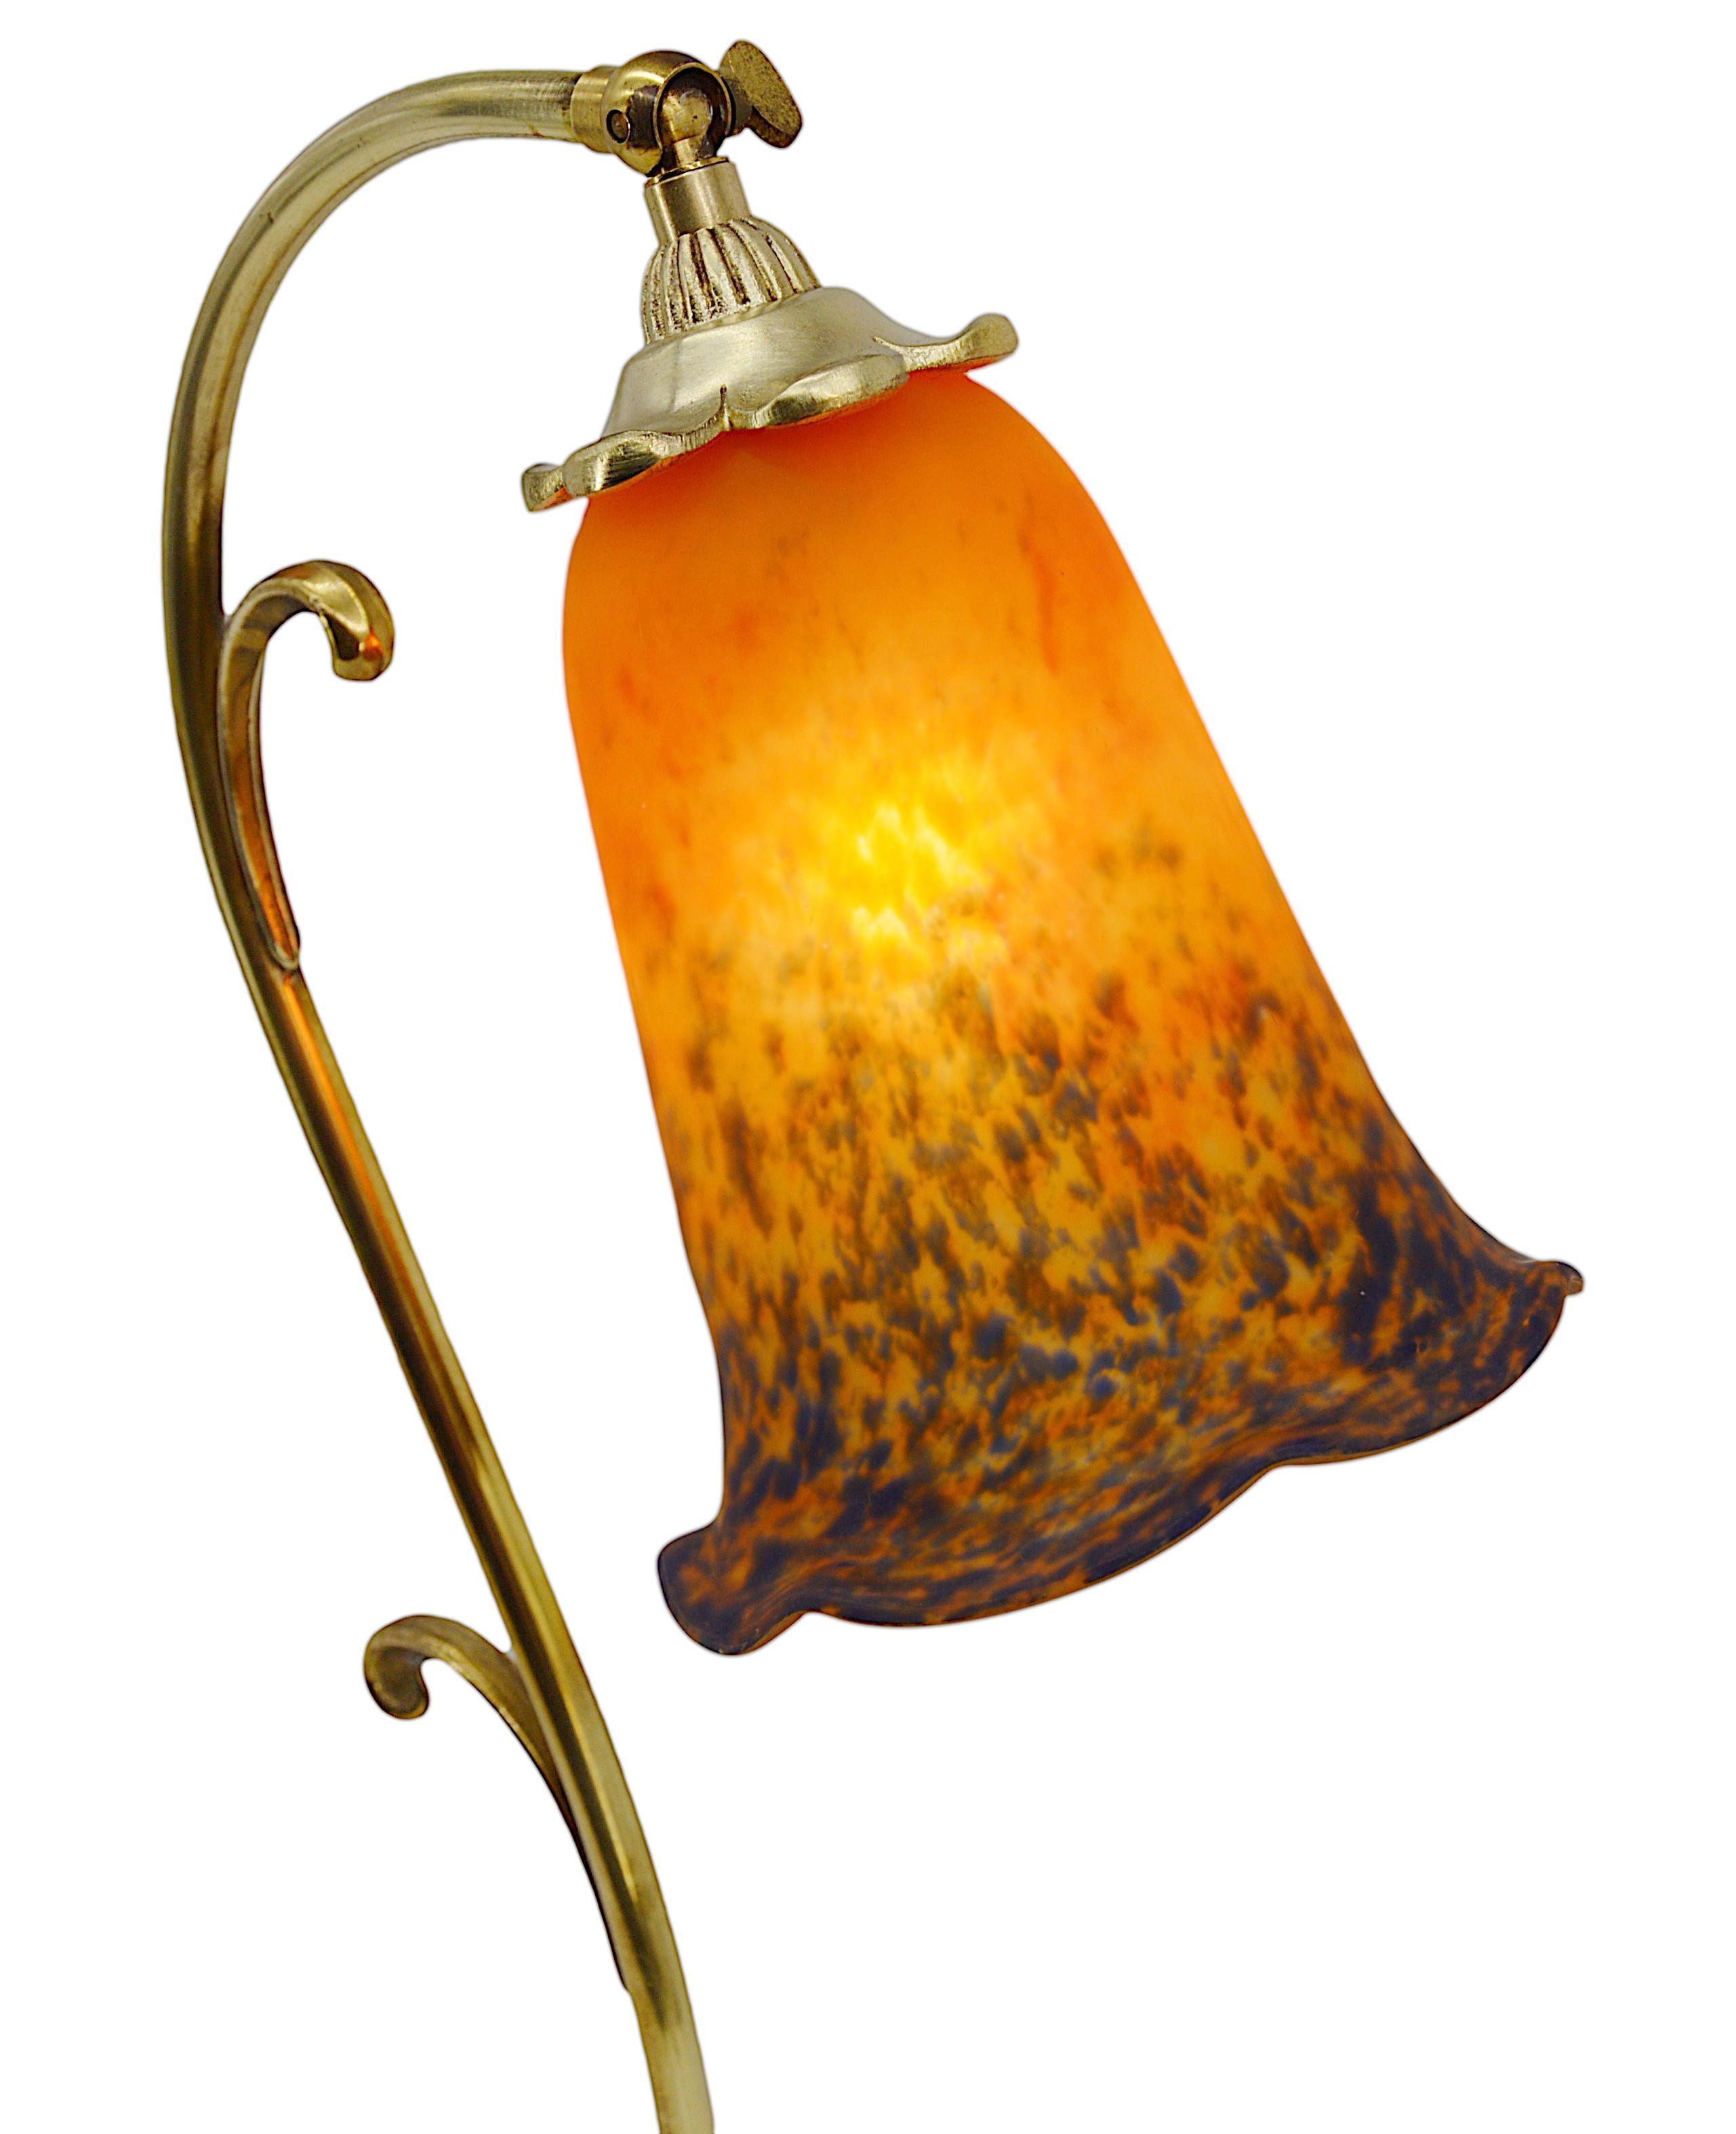 French table lamp by Daum (Croismare), France, ca.1925. Blown double glass shade by Daum hung at its swiveling bronze base. Colors : red, orange & dark blue. Measures: Height: 18.9